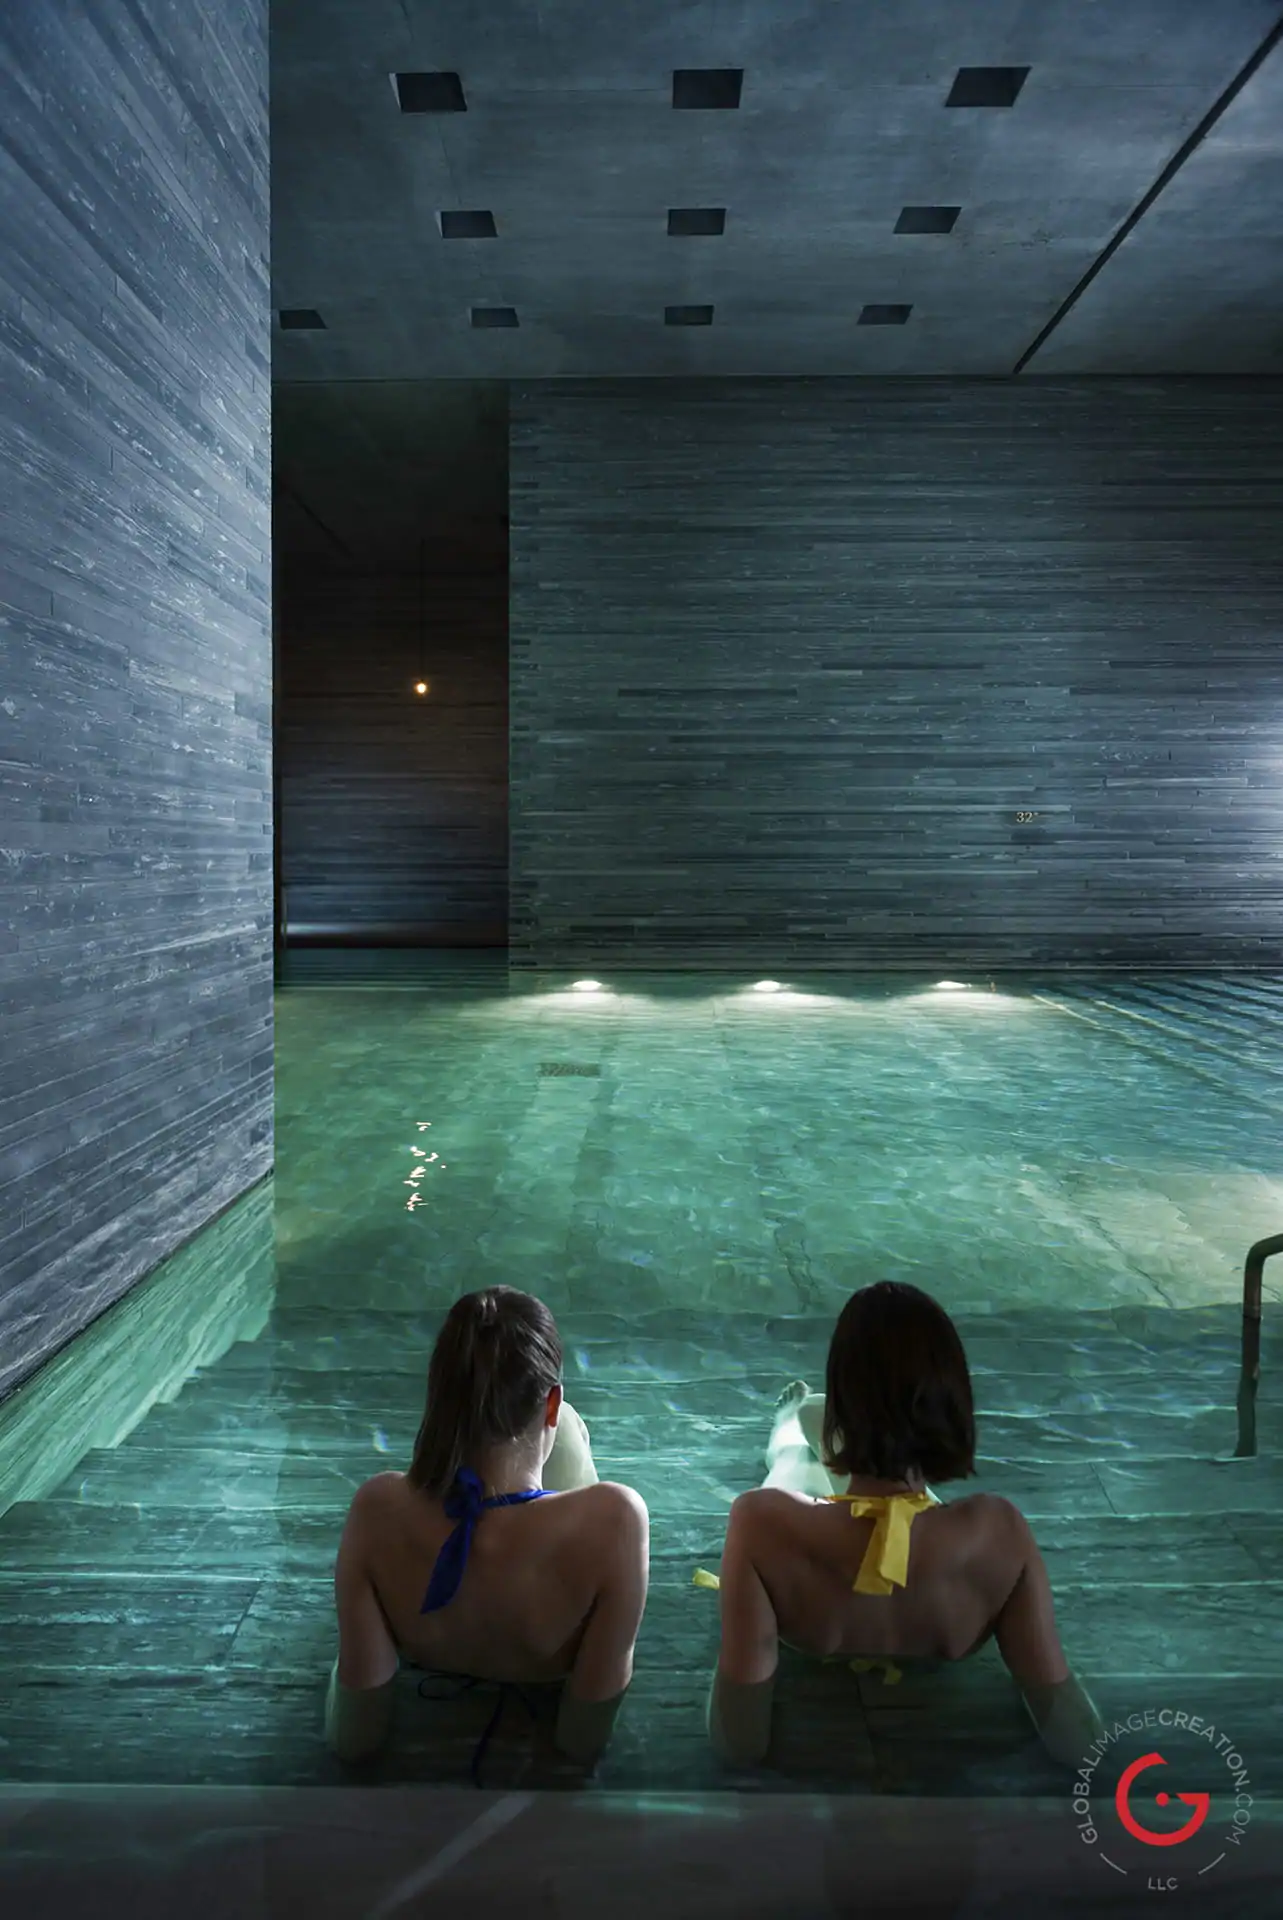 Spa Photography of Ladies Enjoying The Water - Pritzker Prize Award Winning Architecture Peter Zumthor Therme Vals